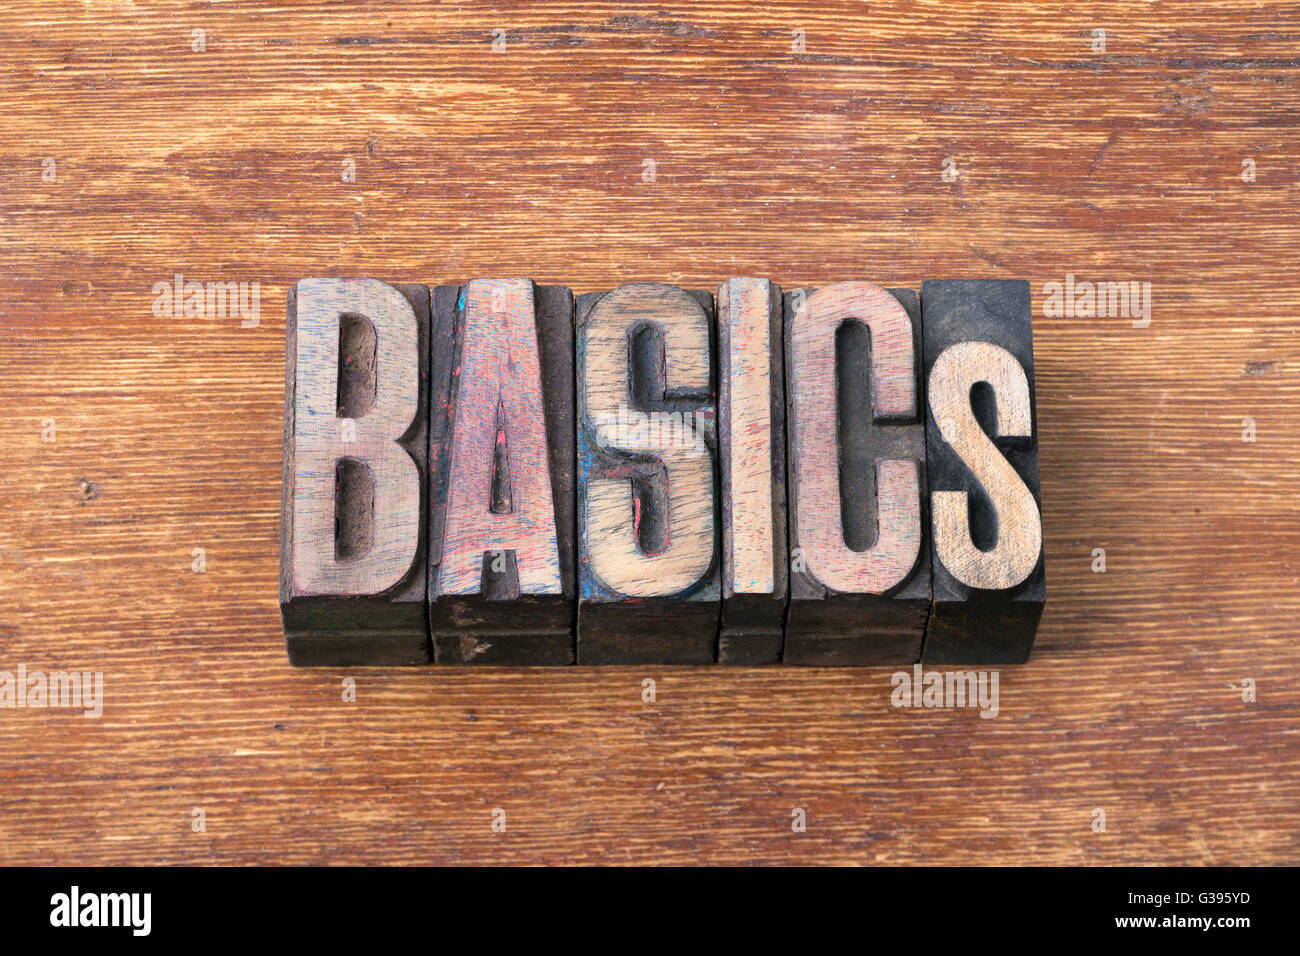 basics word made from wooden letterpress type on grunge wood Stock Photo